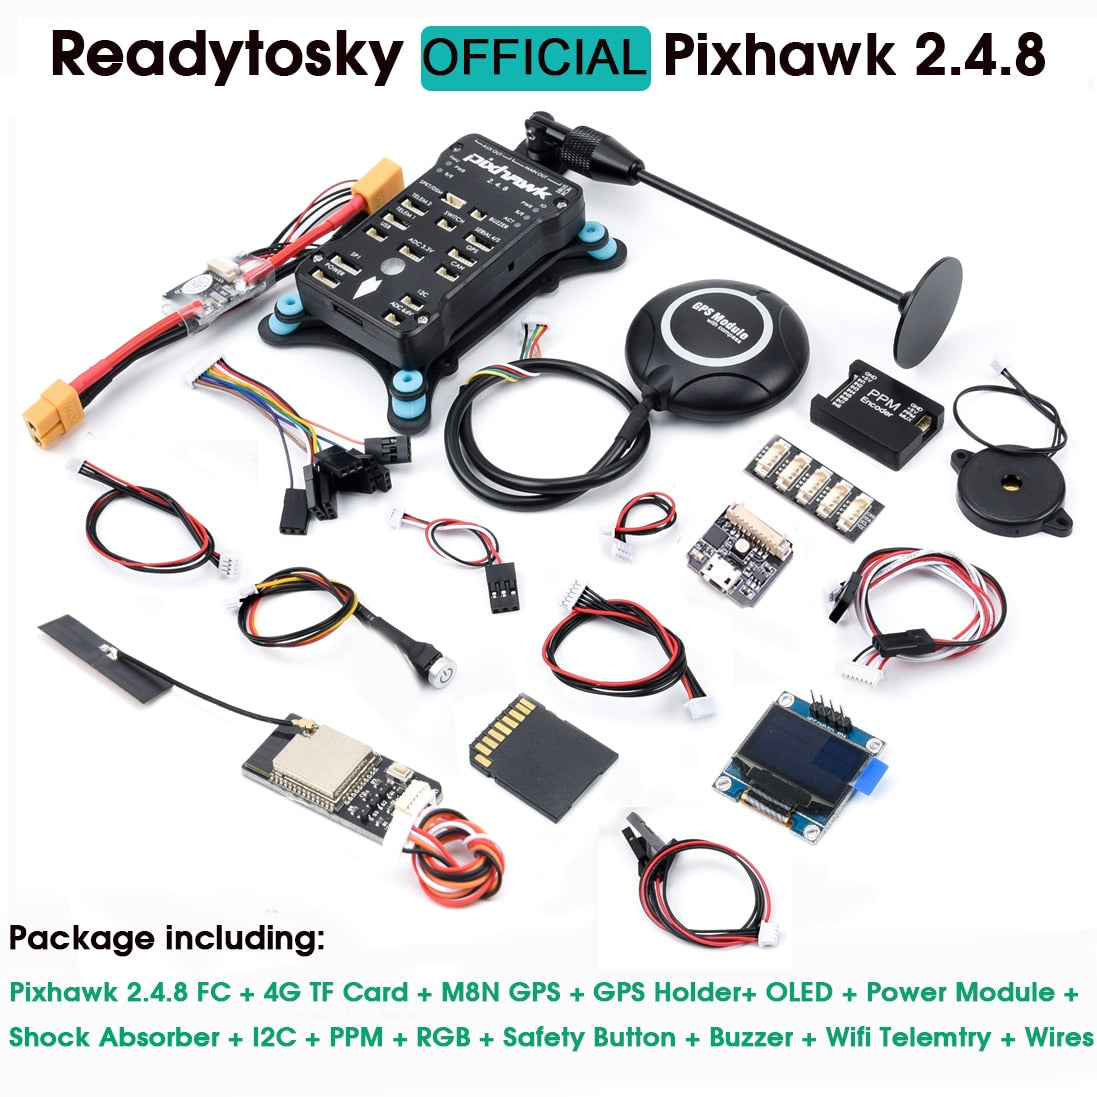 Package includes: Pixhawk 2.4.8 FC + 4G TF Card M8N GPS